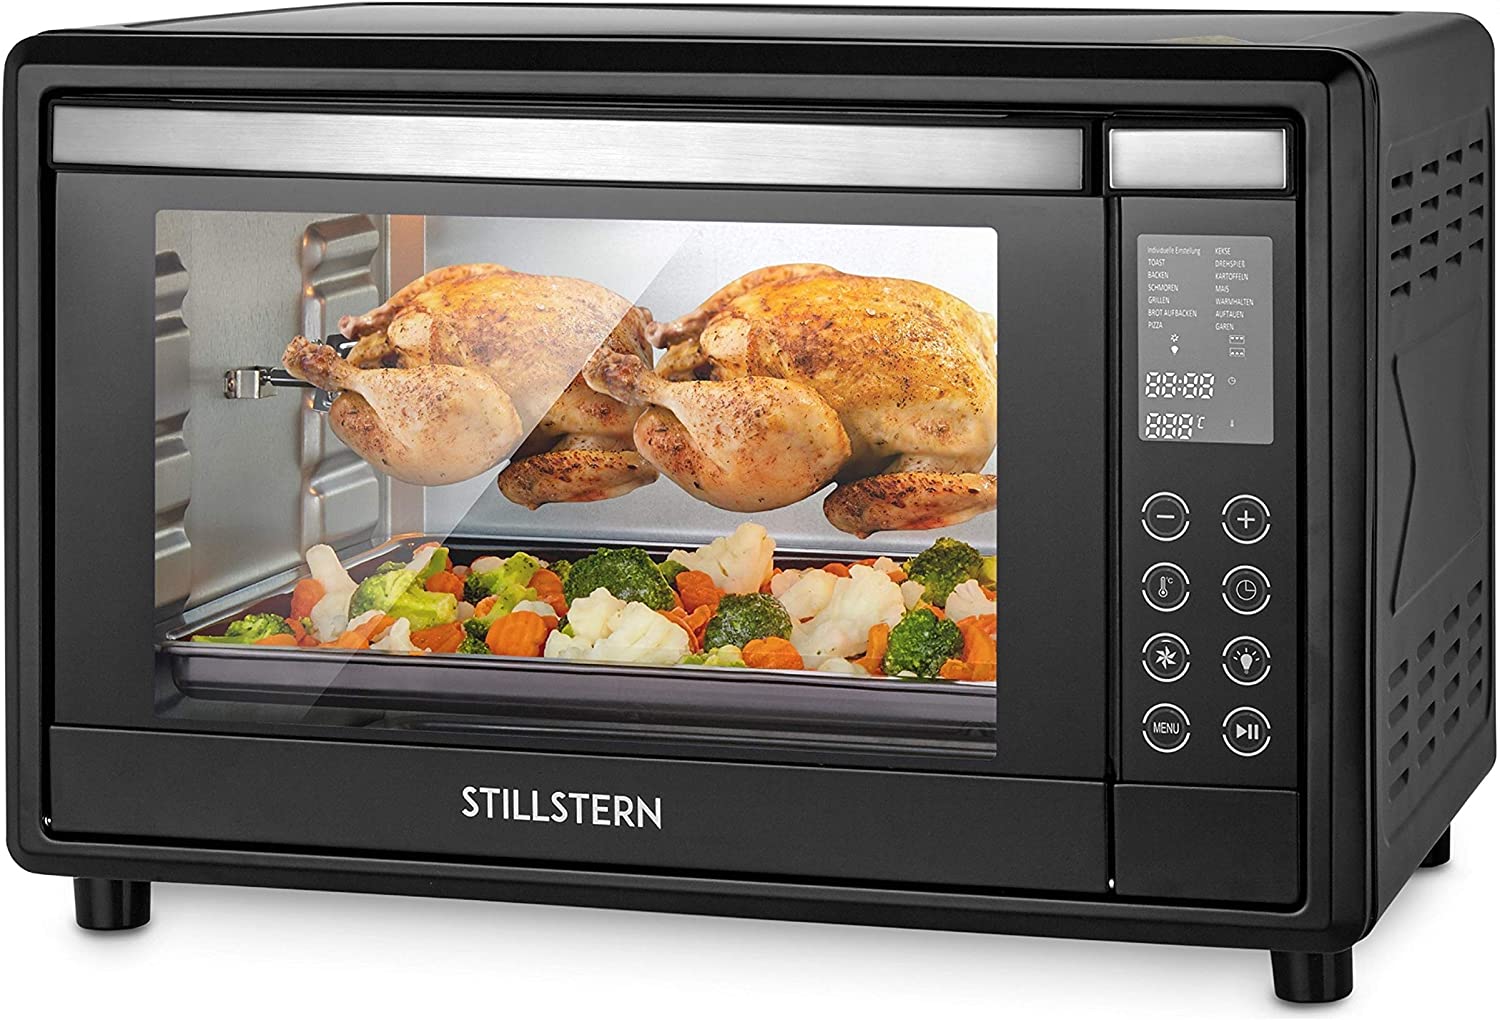 Stillstern Digital mini oven with convection (45 litres) oven gloves ✓ Recipe book ✓ Double glass door ✓ 2000W ✓ LED display ✓ 13 programmes ✓ Rotary spit ✓ Crumb plate ✓ Timer ✓ Interior lighting